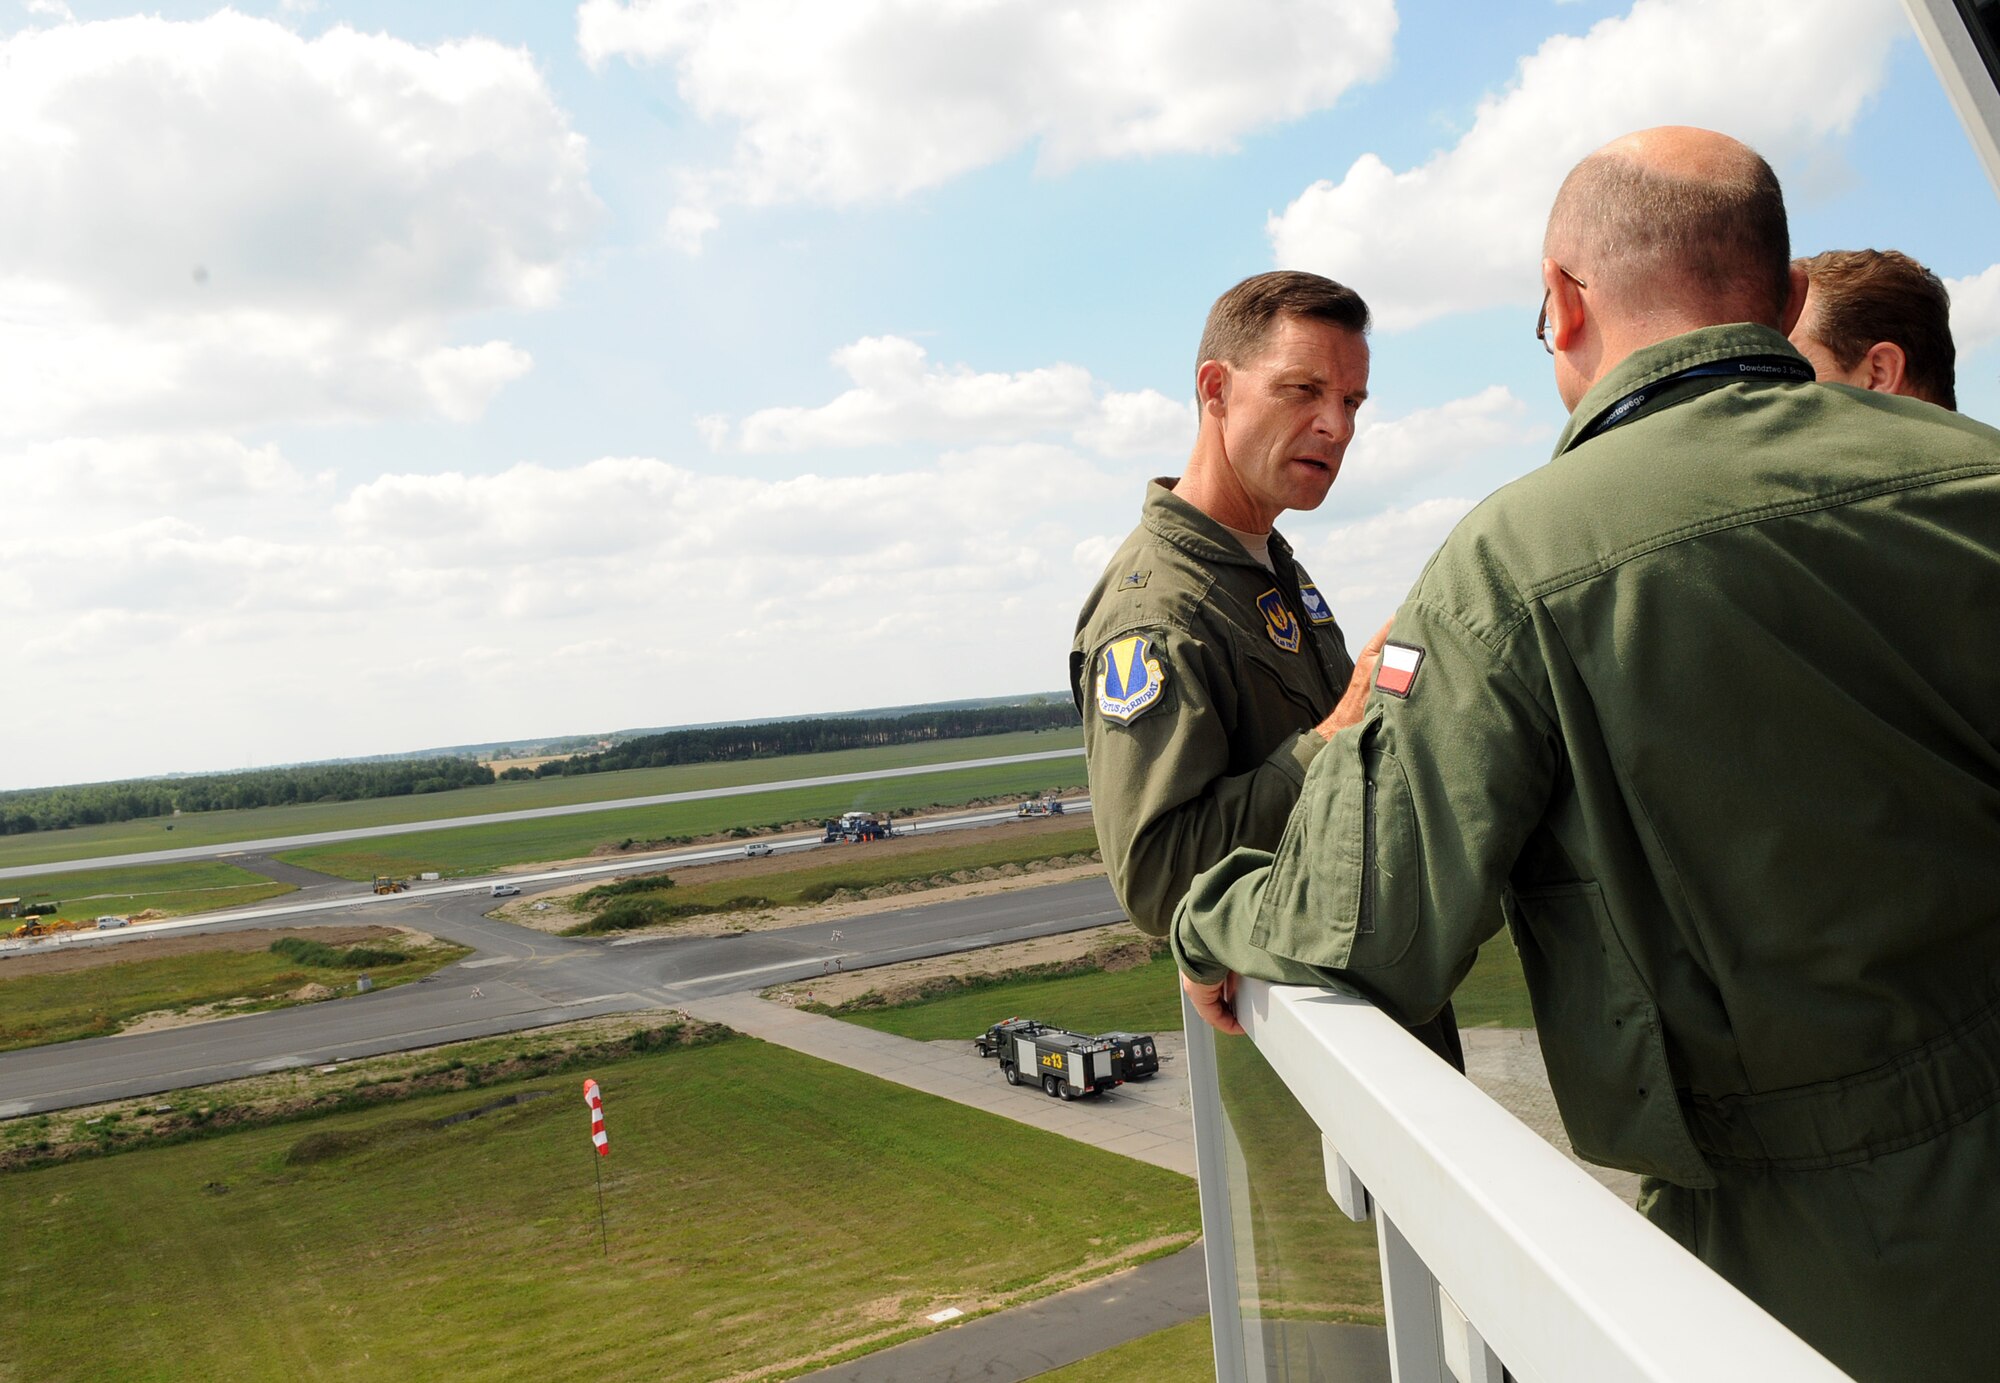 Brig. Gen. Mark Dillon, 86th Airlift Wing commander, and Polish air force Col. pil. Slawomir Zakowski, 3rd Airlift Wing commander, tour the control tower and view the airfield during a visit to Powidz Air Base, Poland, July 26, 2011. Dillon made his annual visit to Powidz after signing a letter of intention last year in June. By singing the letter of intention, the 86th AW and the 3rd AW became "sister wings" in an effort to improve operational capabilities. (U.S.  Air Force photo by Staff Sgt. Tyrona Lawson). 